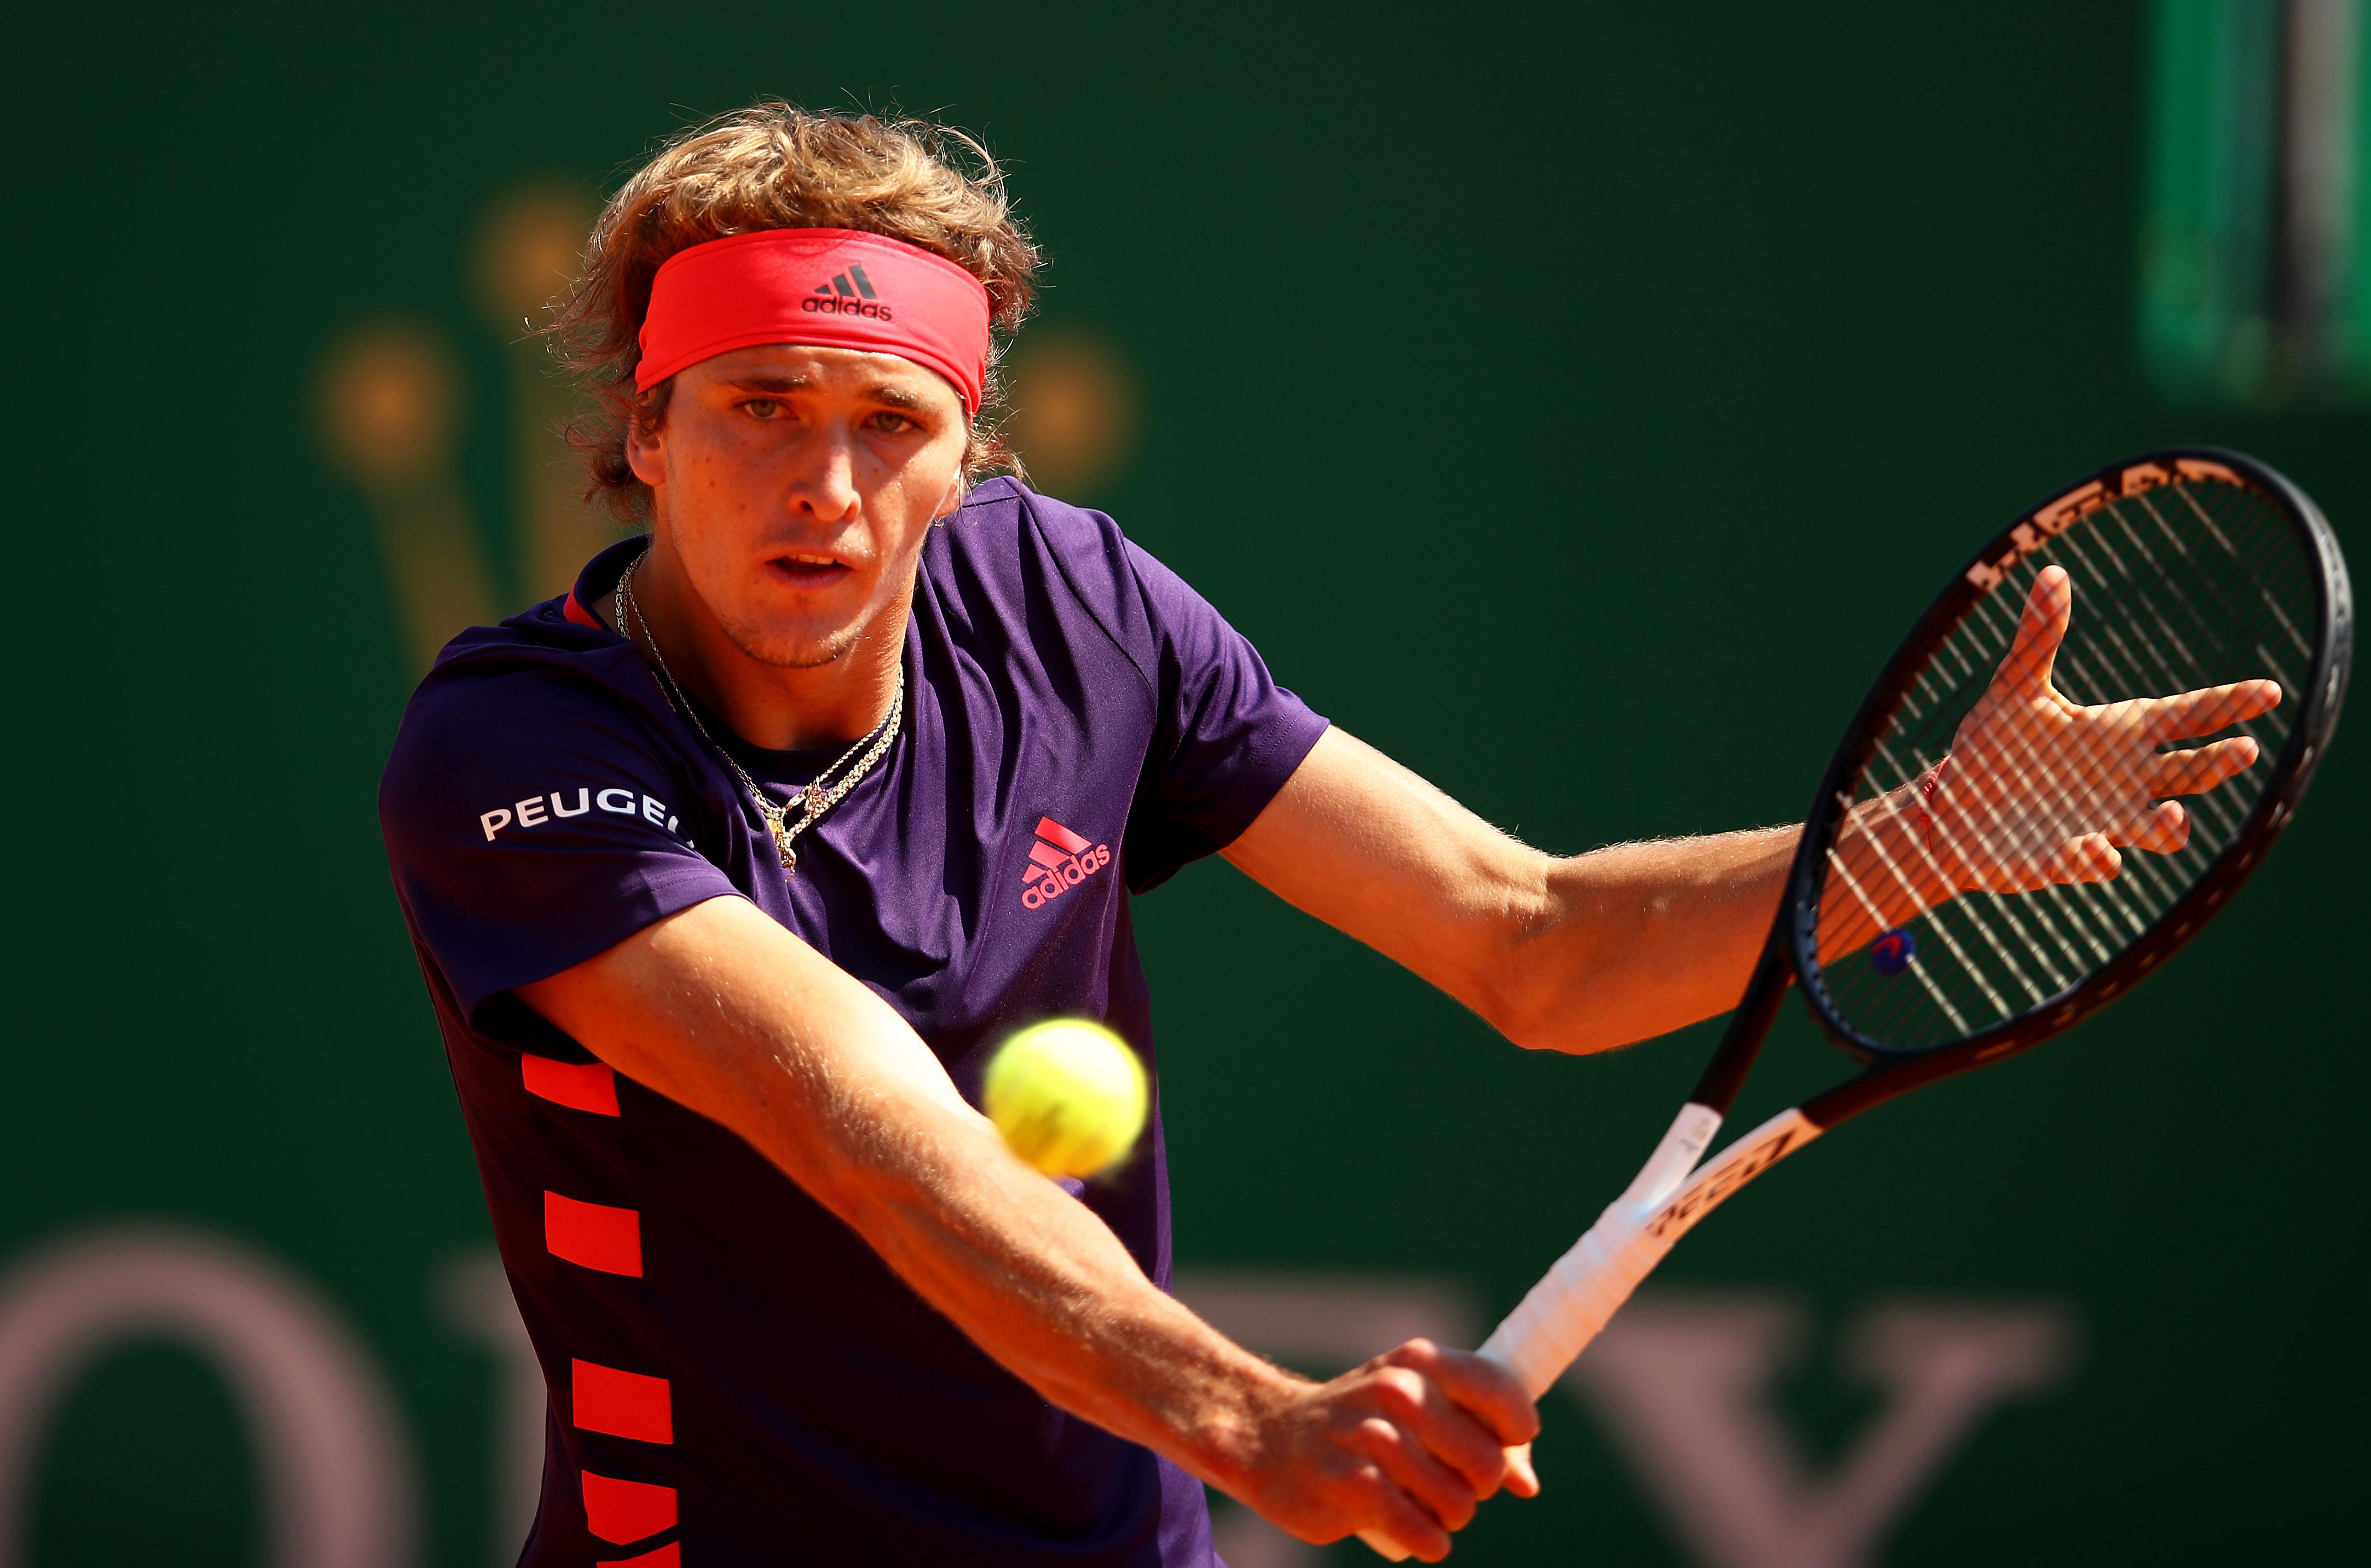 After a slow start, and with a lot at stake, can Zverev flip